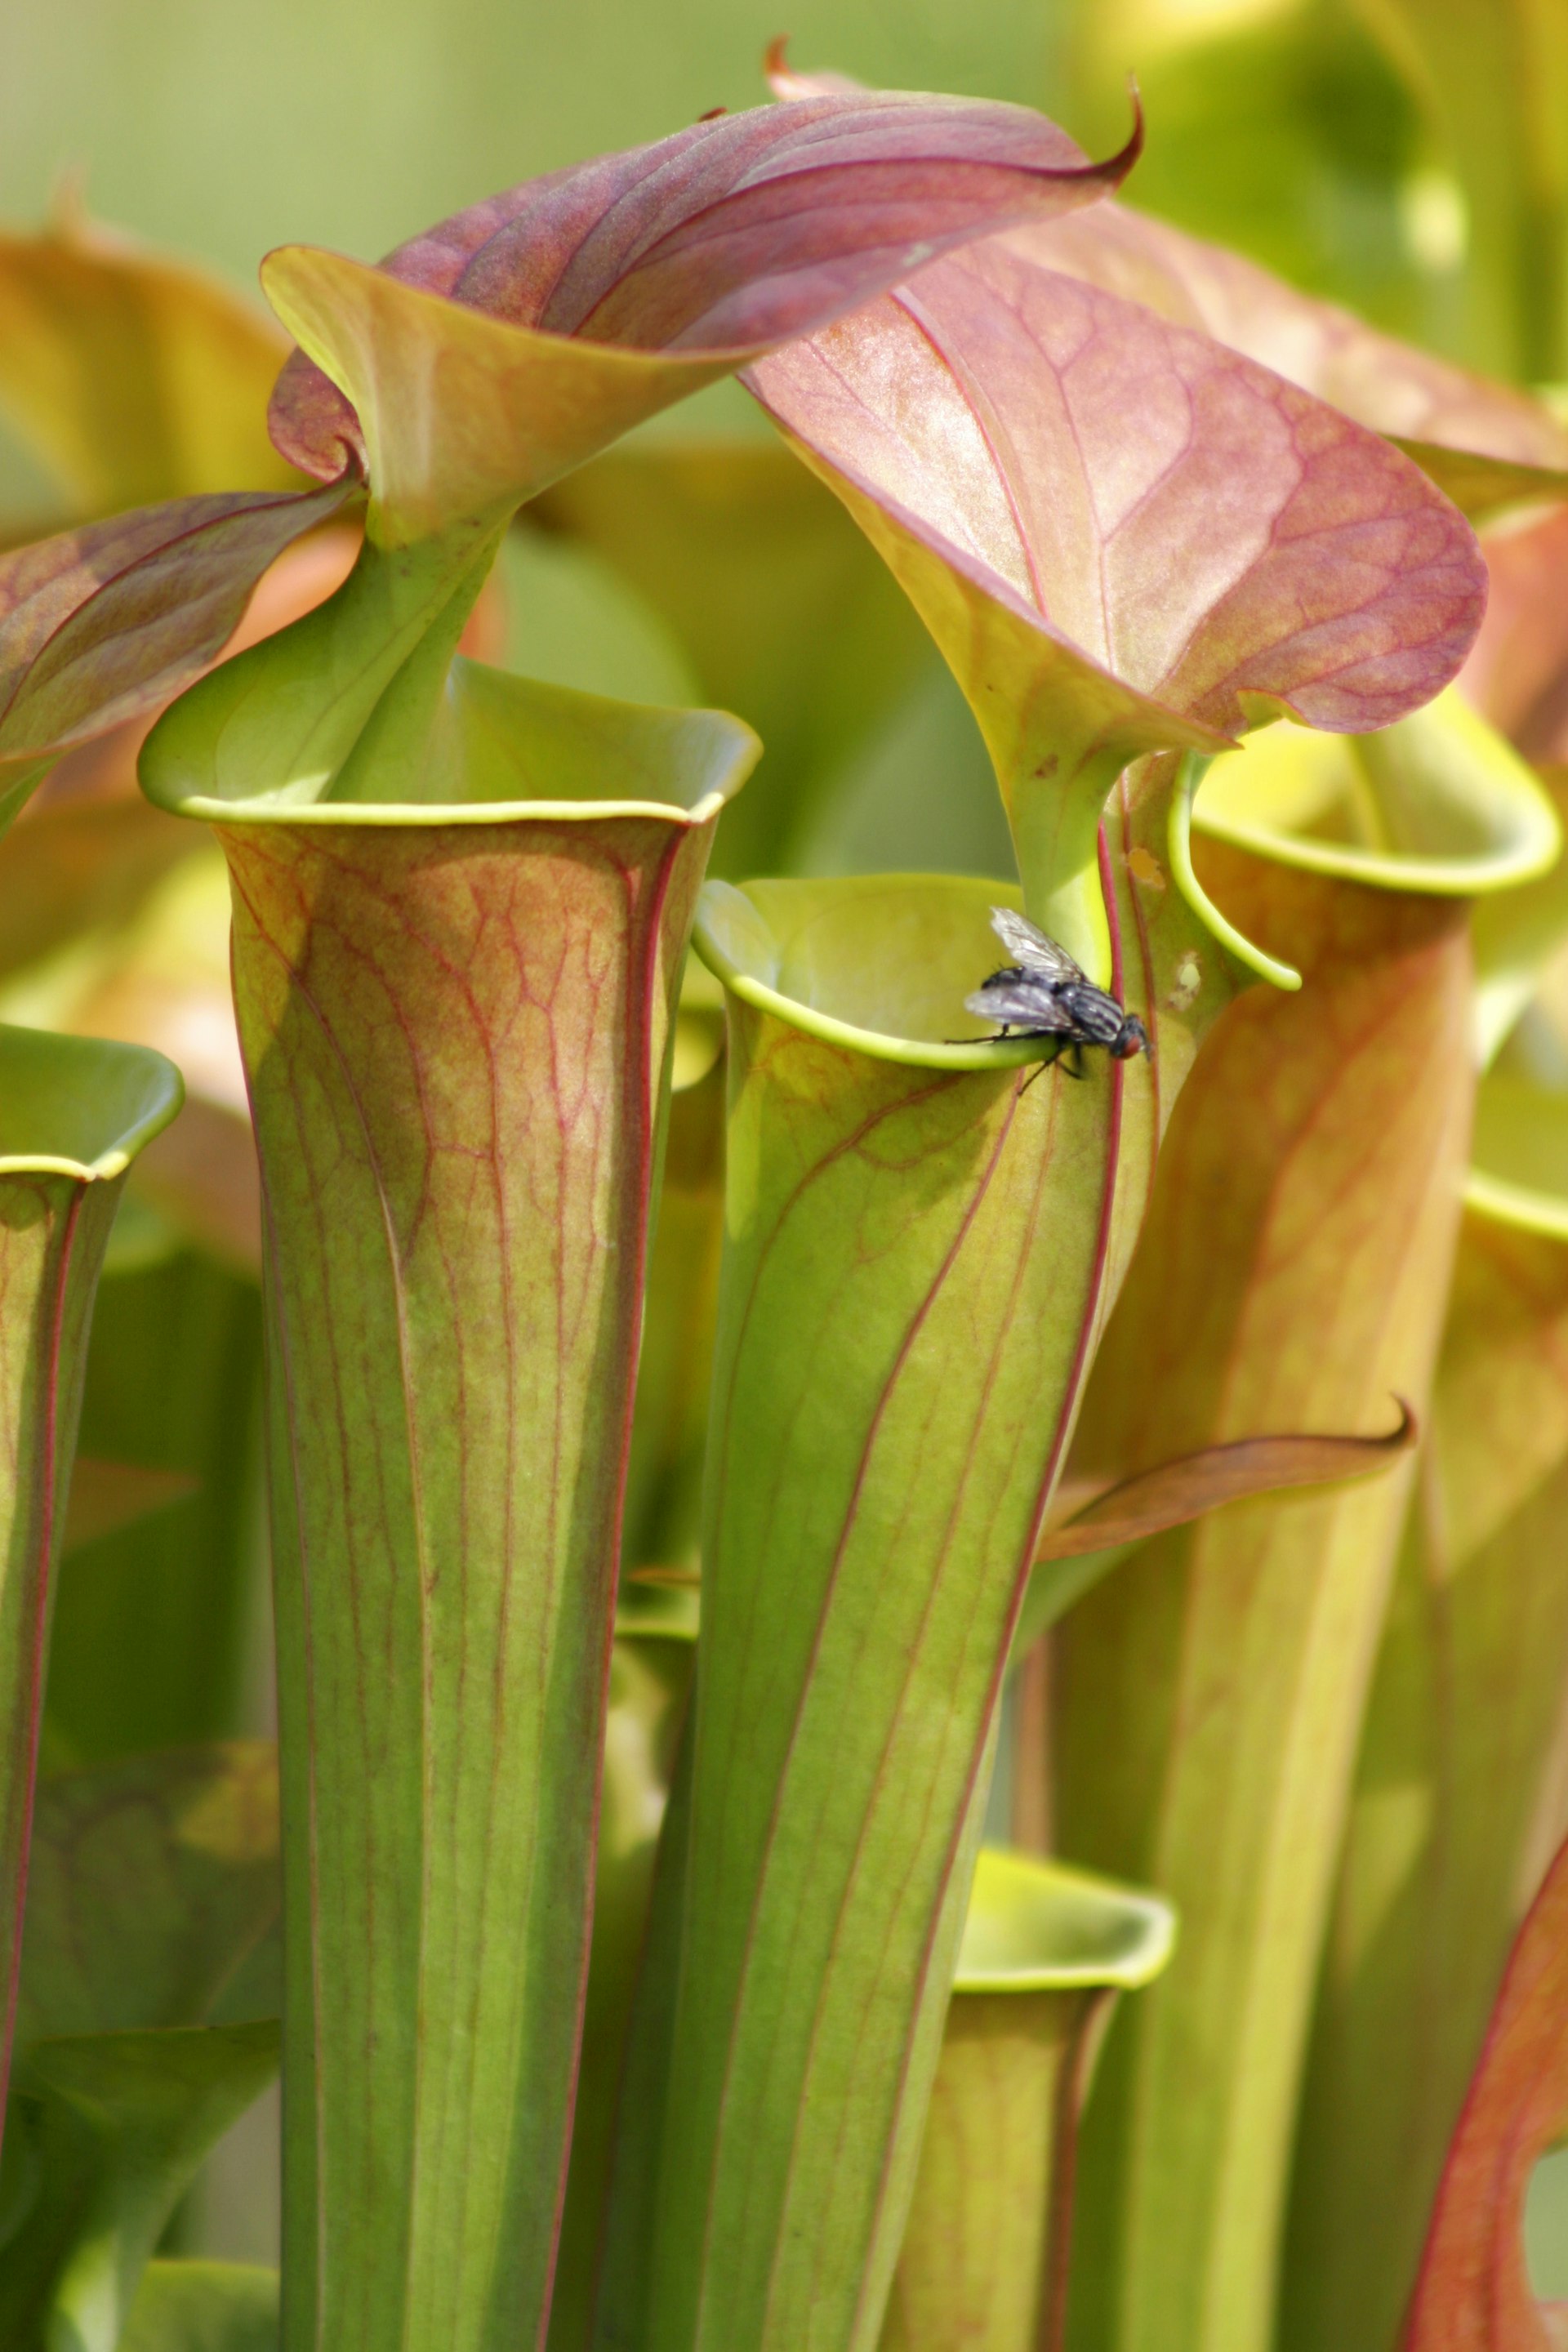 a fly rests on the edge of the carnivorous pitcher plant © CHknox / Getty Images 